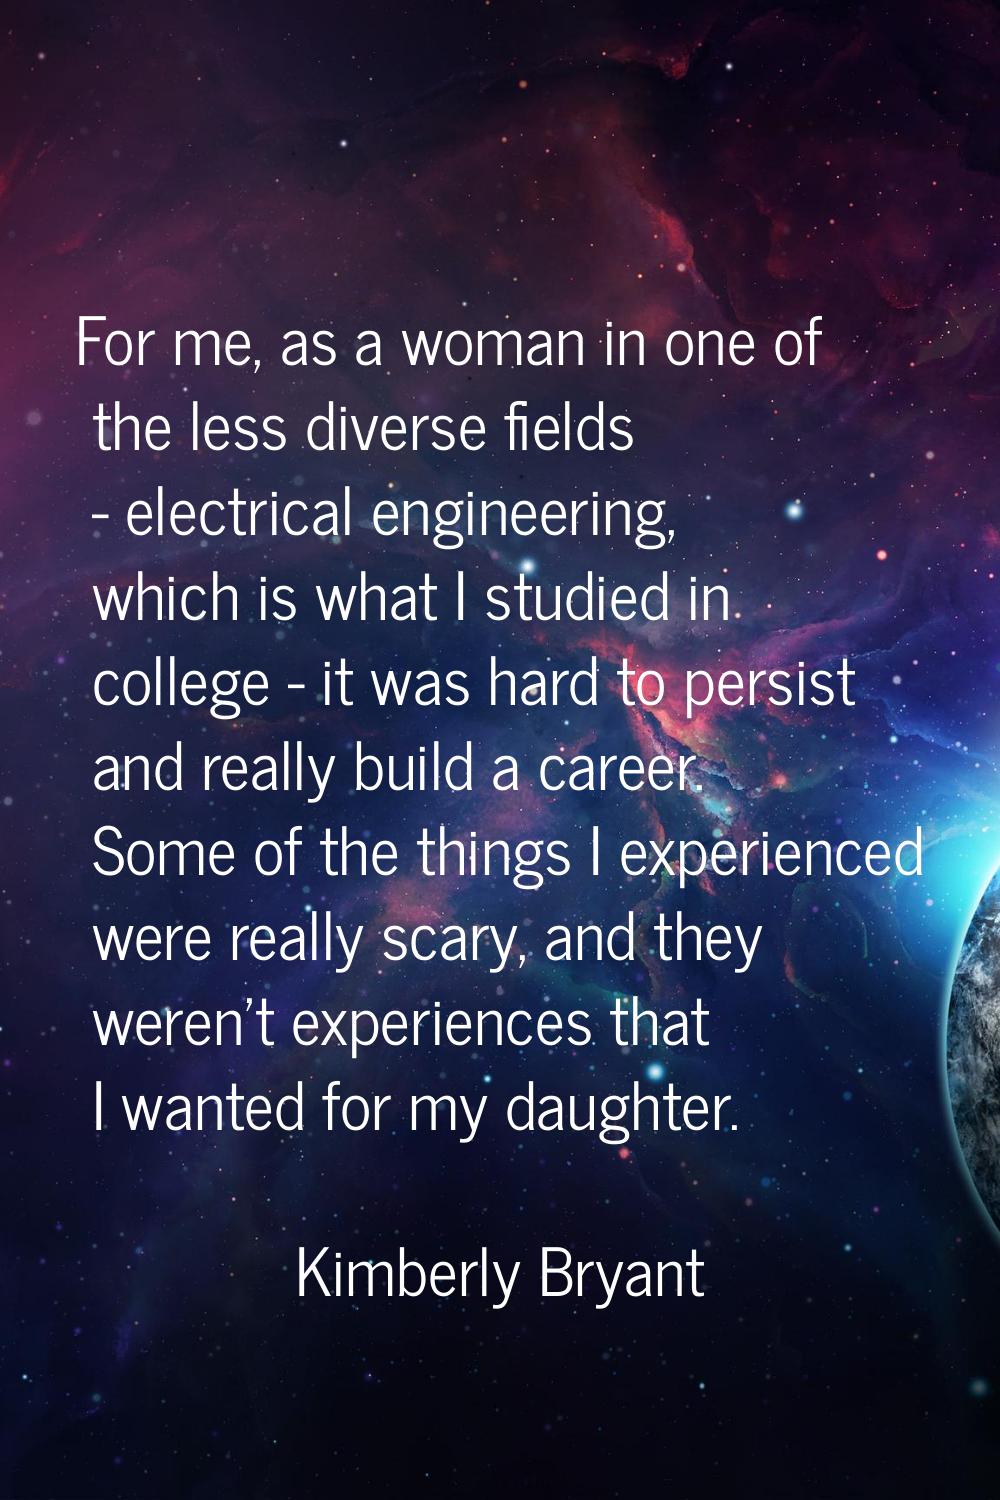 For me, as a woman in one of the less diverse fields - electrical engineering, which is what I stud